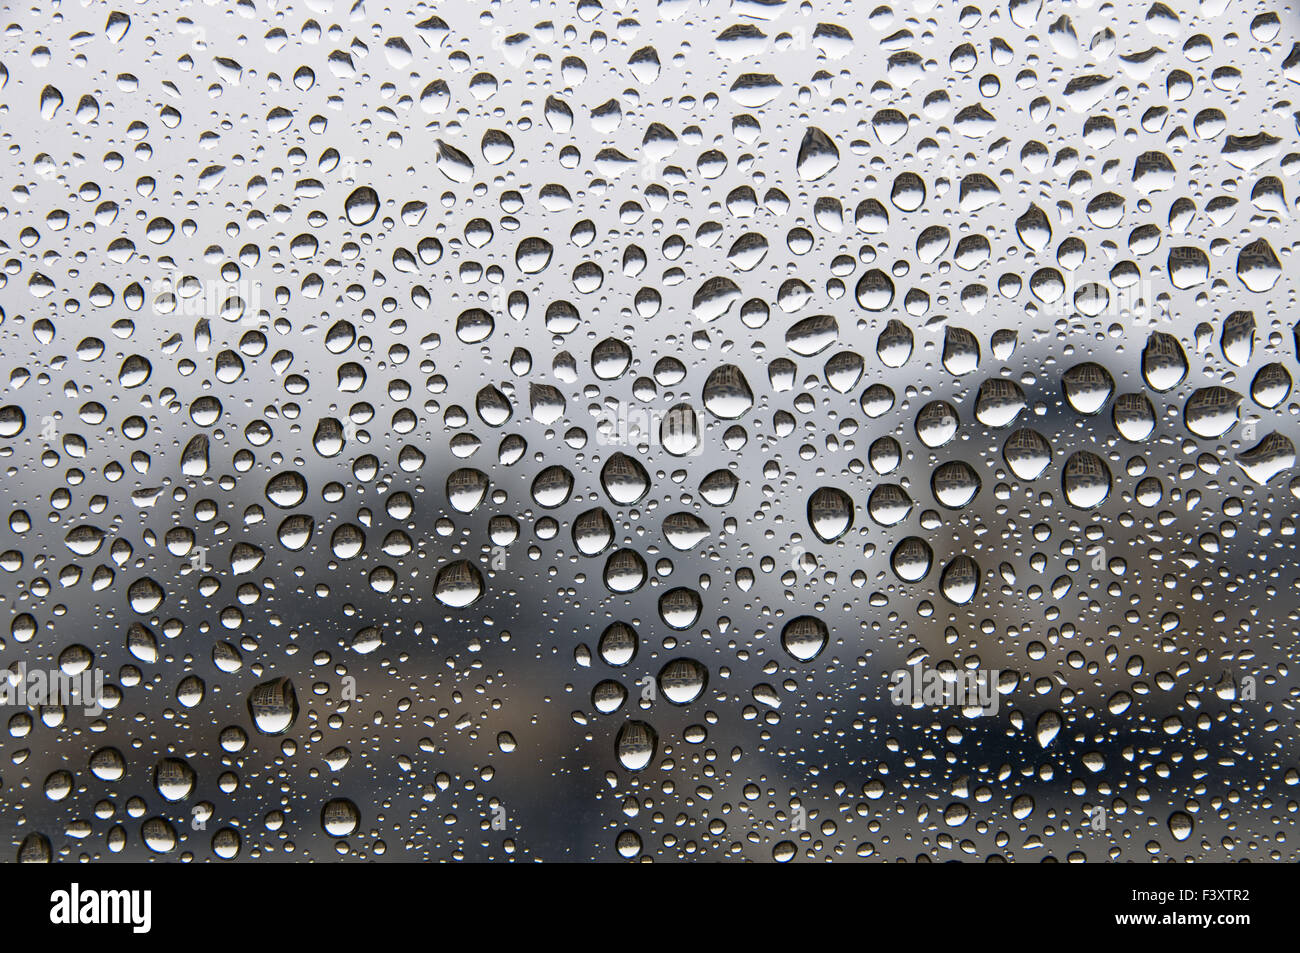 Background of water drops on glass Stock Photo